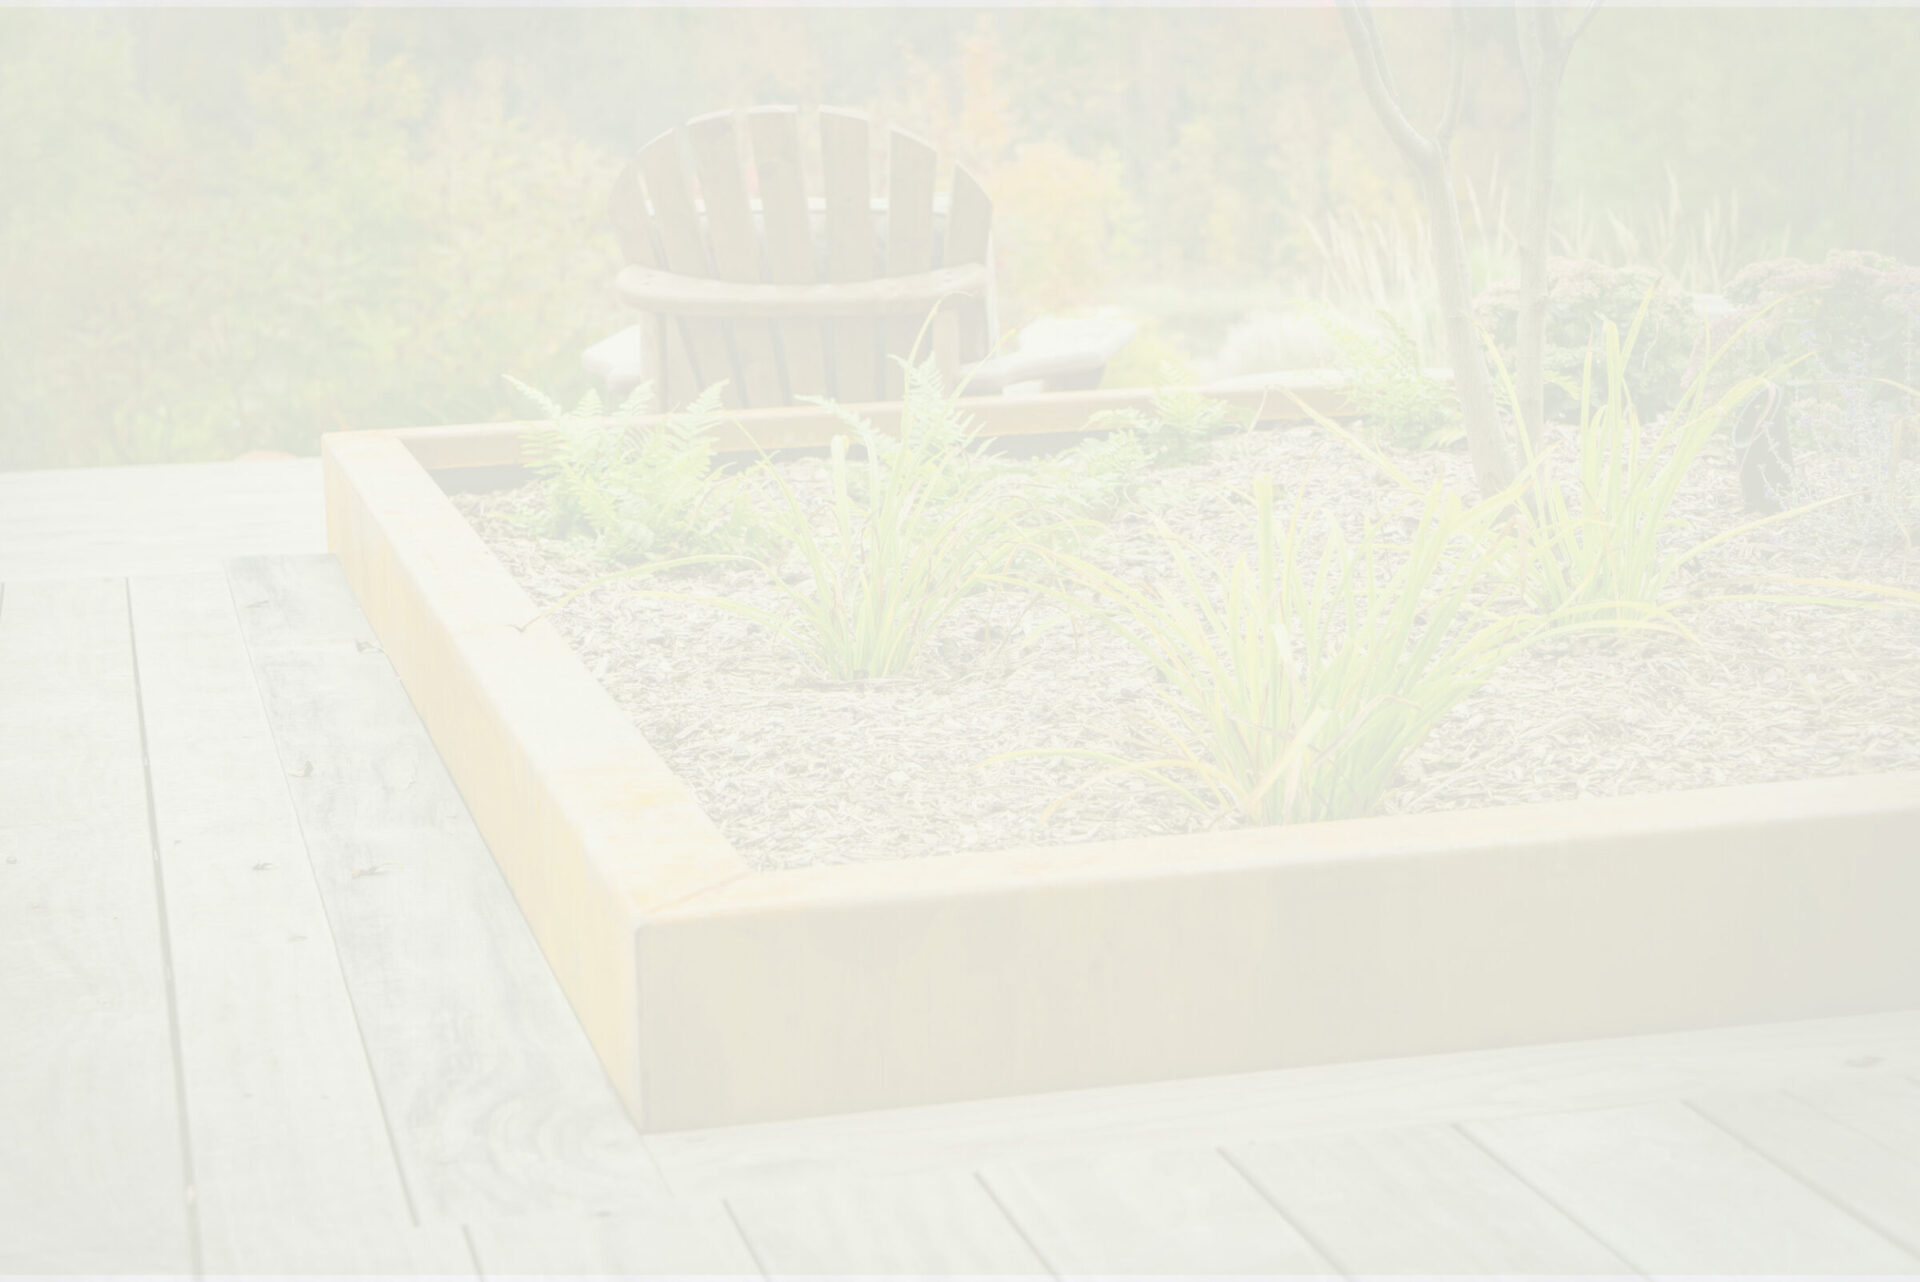 The image shows an overexposed view of an outdoor setting with a raised garden bed, wooden Adirondack chair, and a blurred forest background.